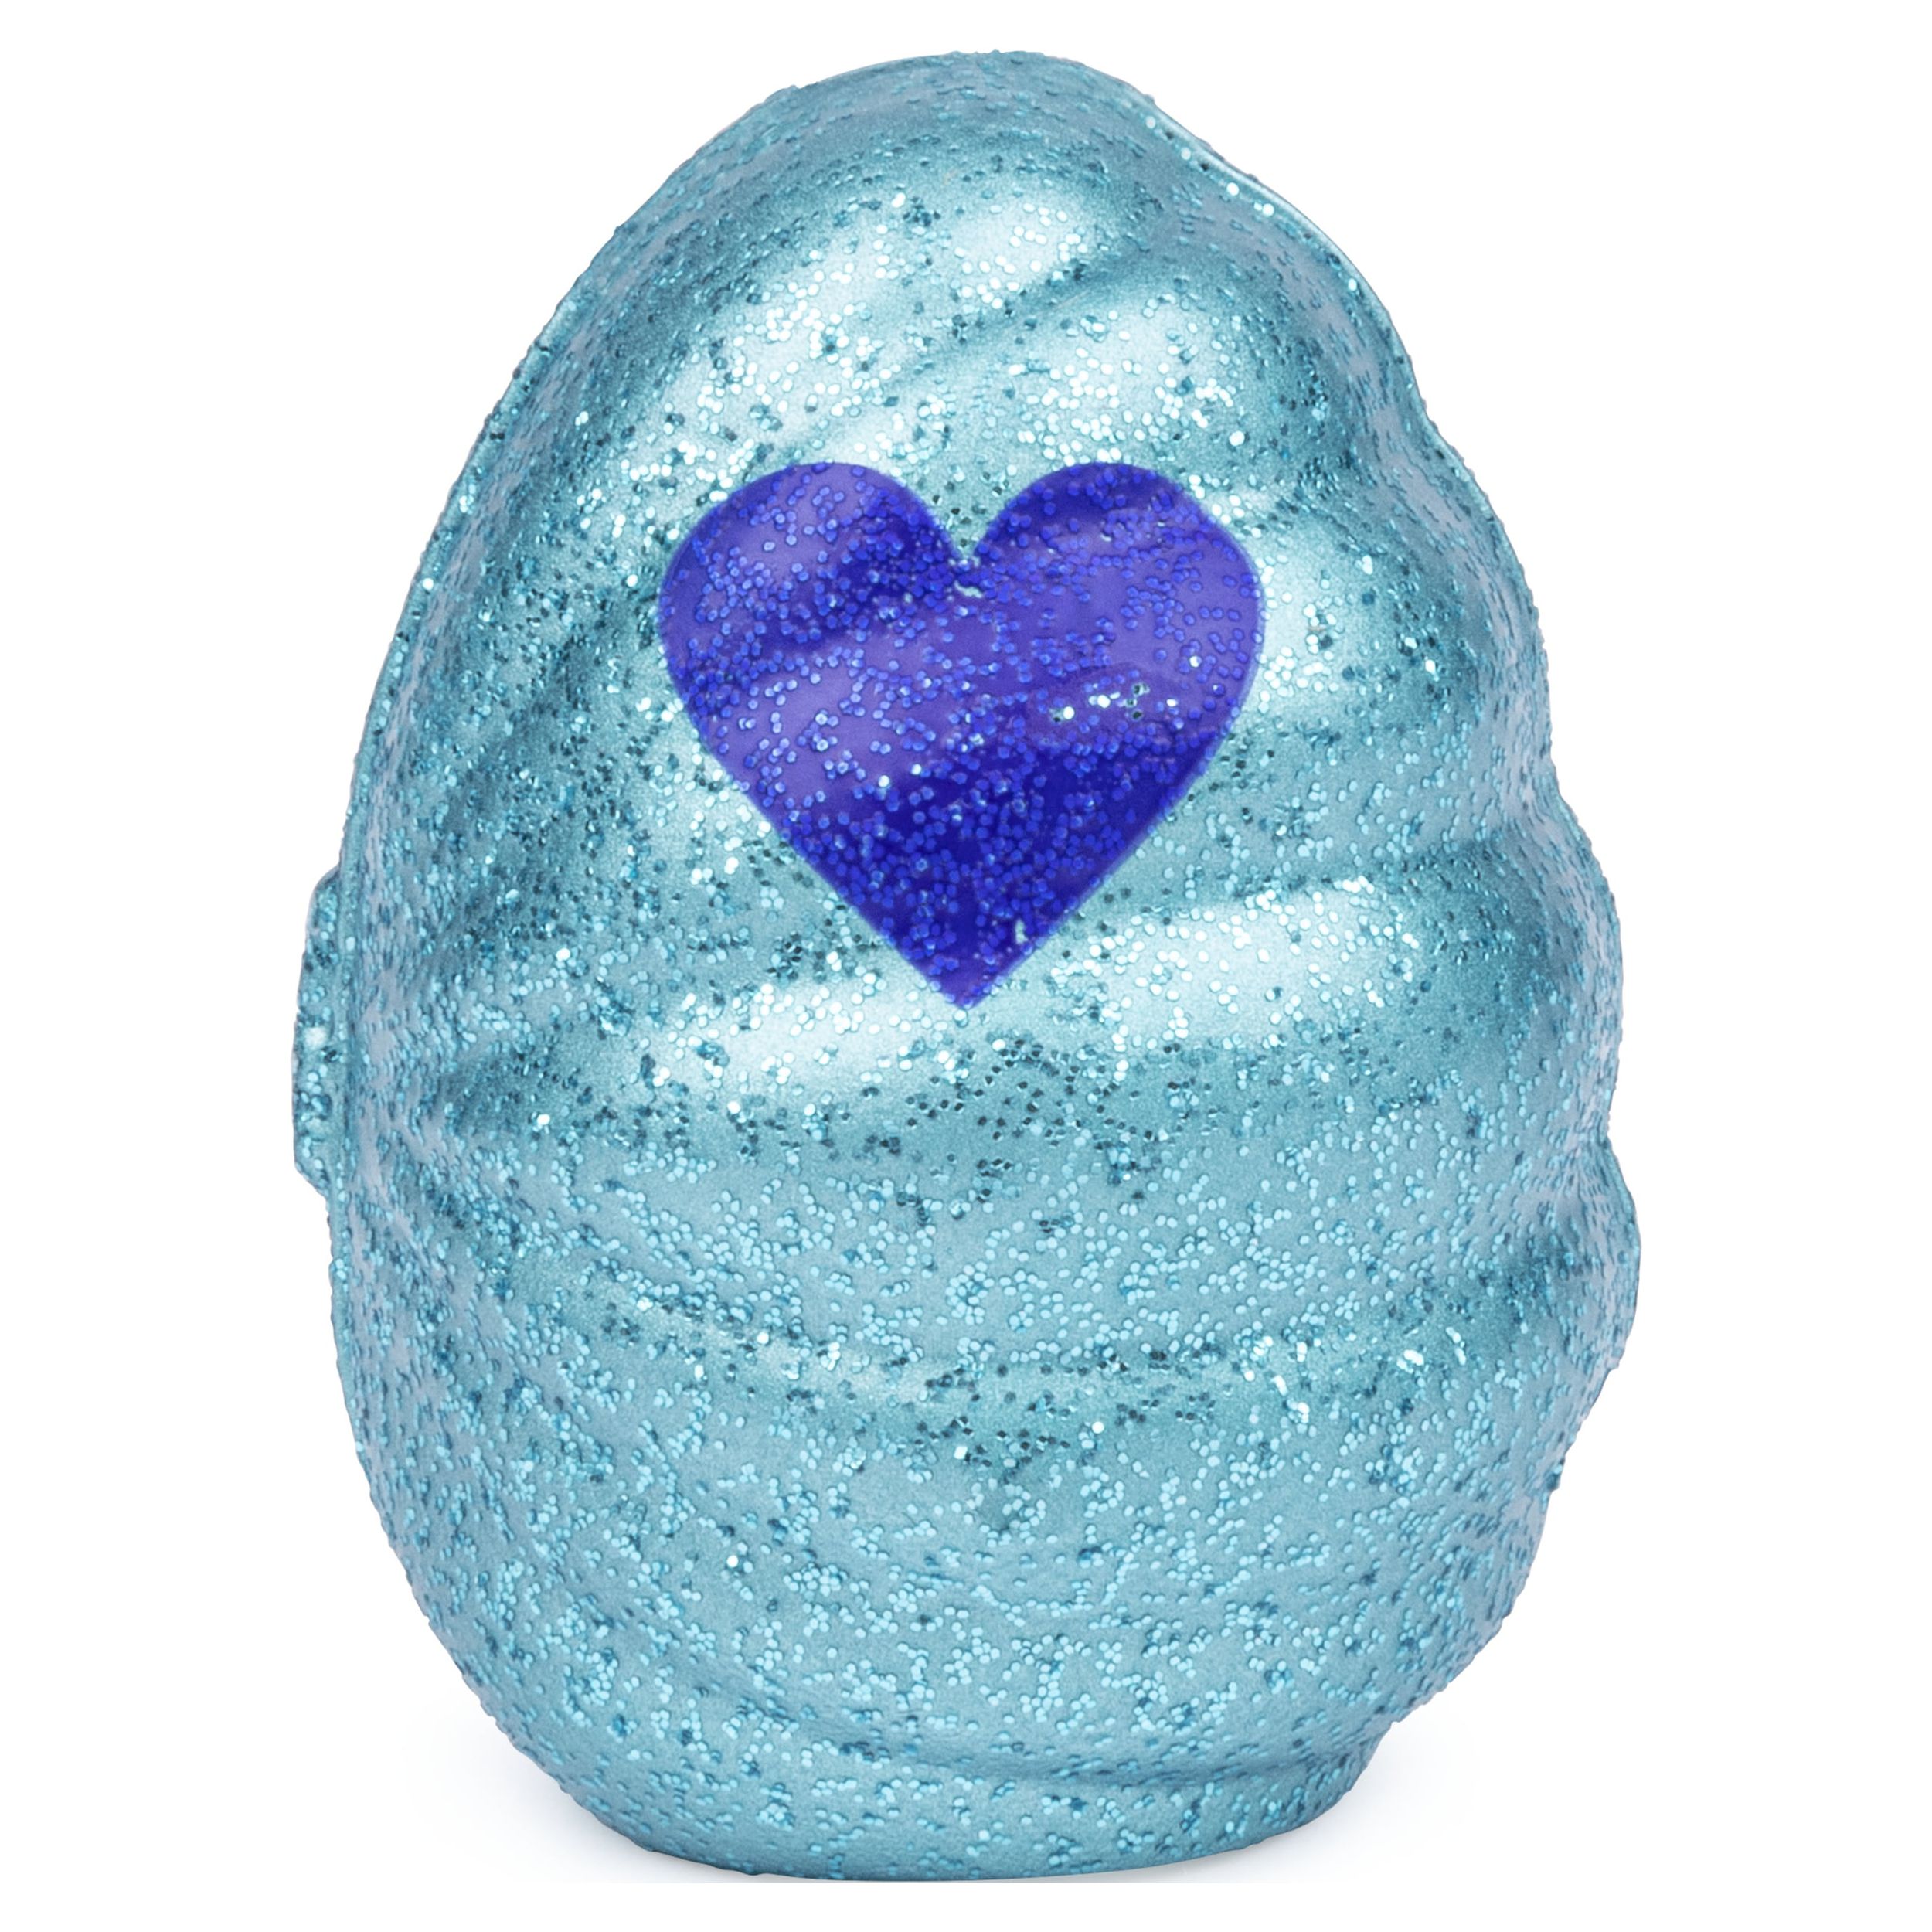 Hatchimals CollEGGtibles, Mermal Magic 1 Pack with a Season 5 Hatchimal, for Kids Aged 5 and Up (Styles May Vary) - image 3 of 8